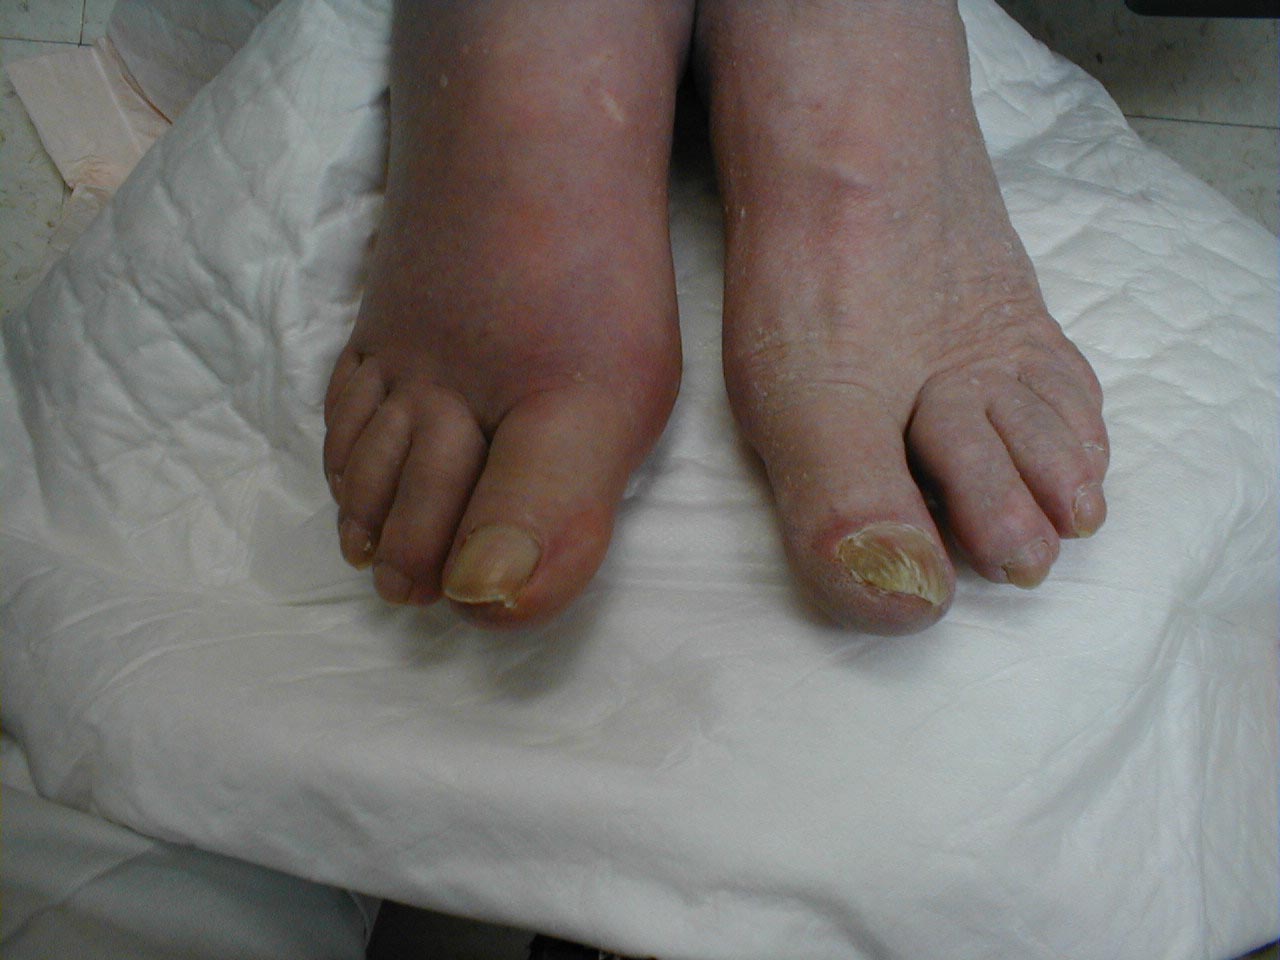 Gout of the Right Great Toe: Diffuse swelling and redness centered at the right MTP joint, but extending over much of the foot.